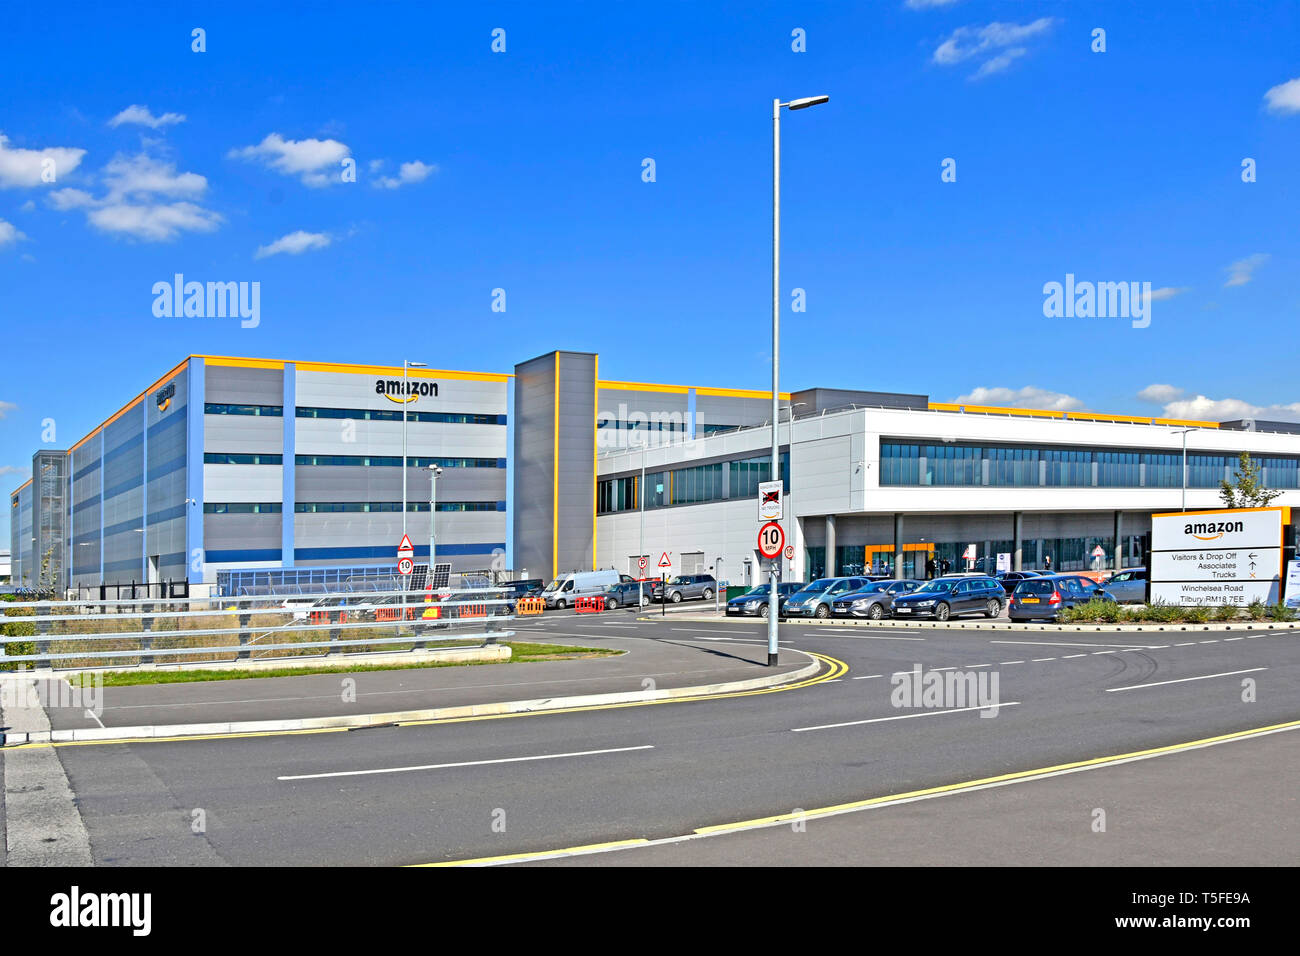 Amazon Uk Fulfilment Centre High Resolution Stock Photography And Images Alamy